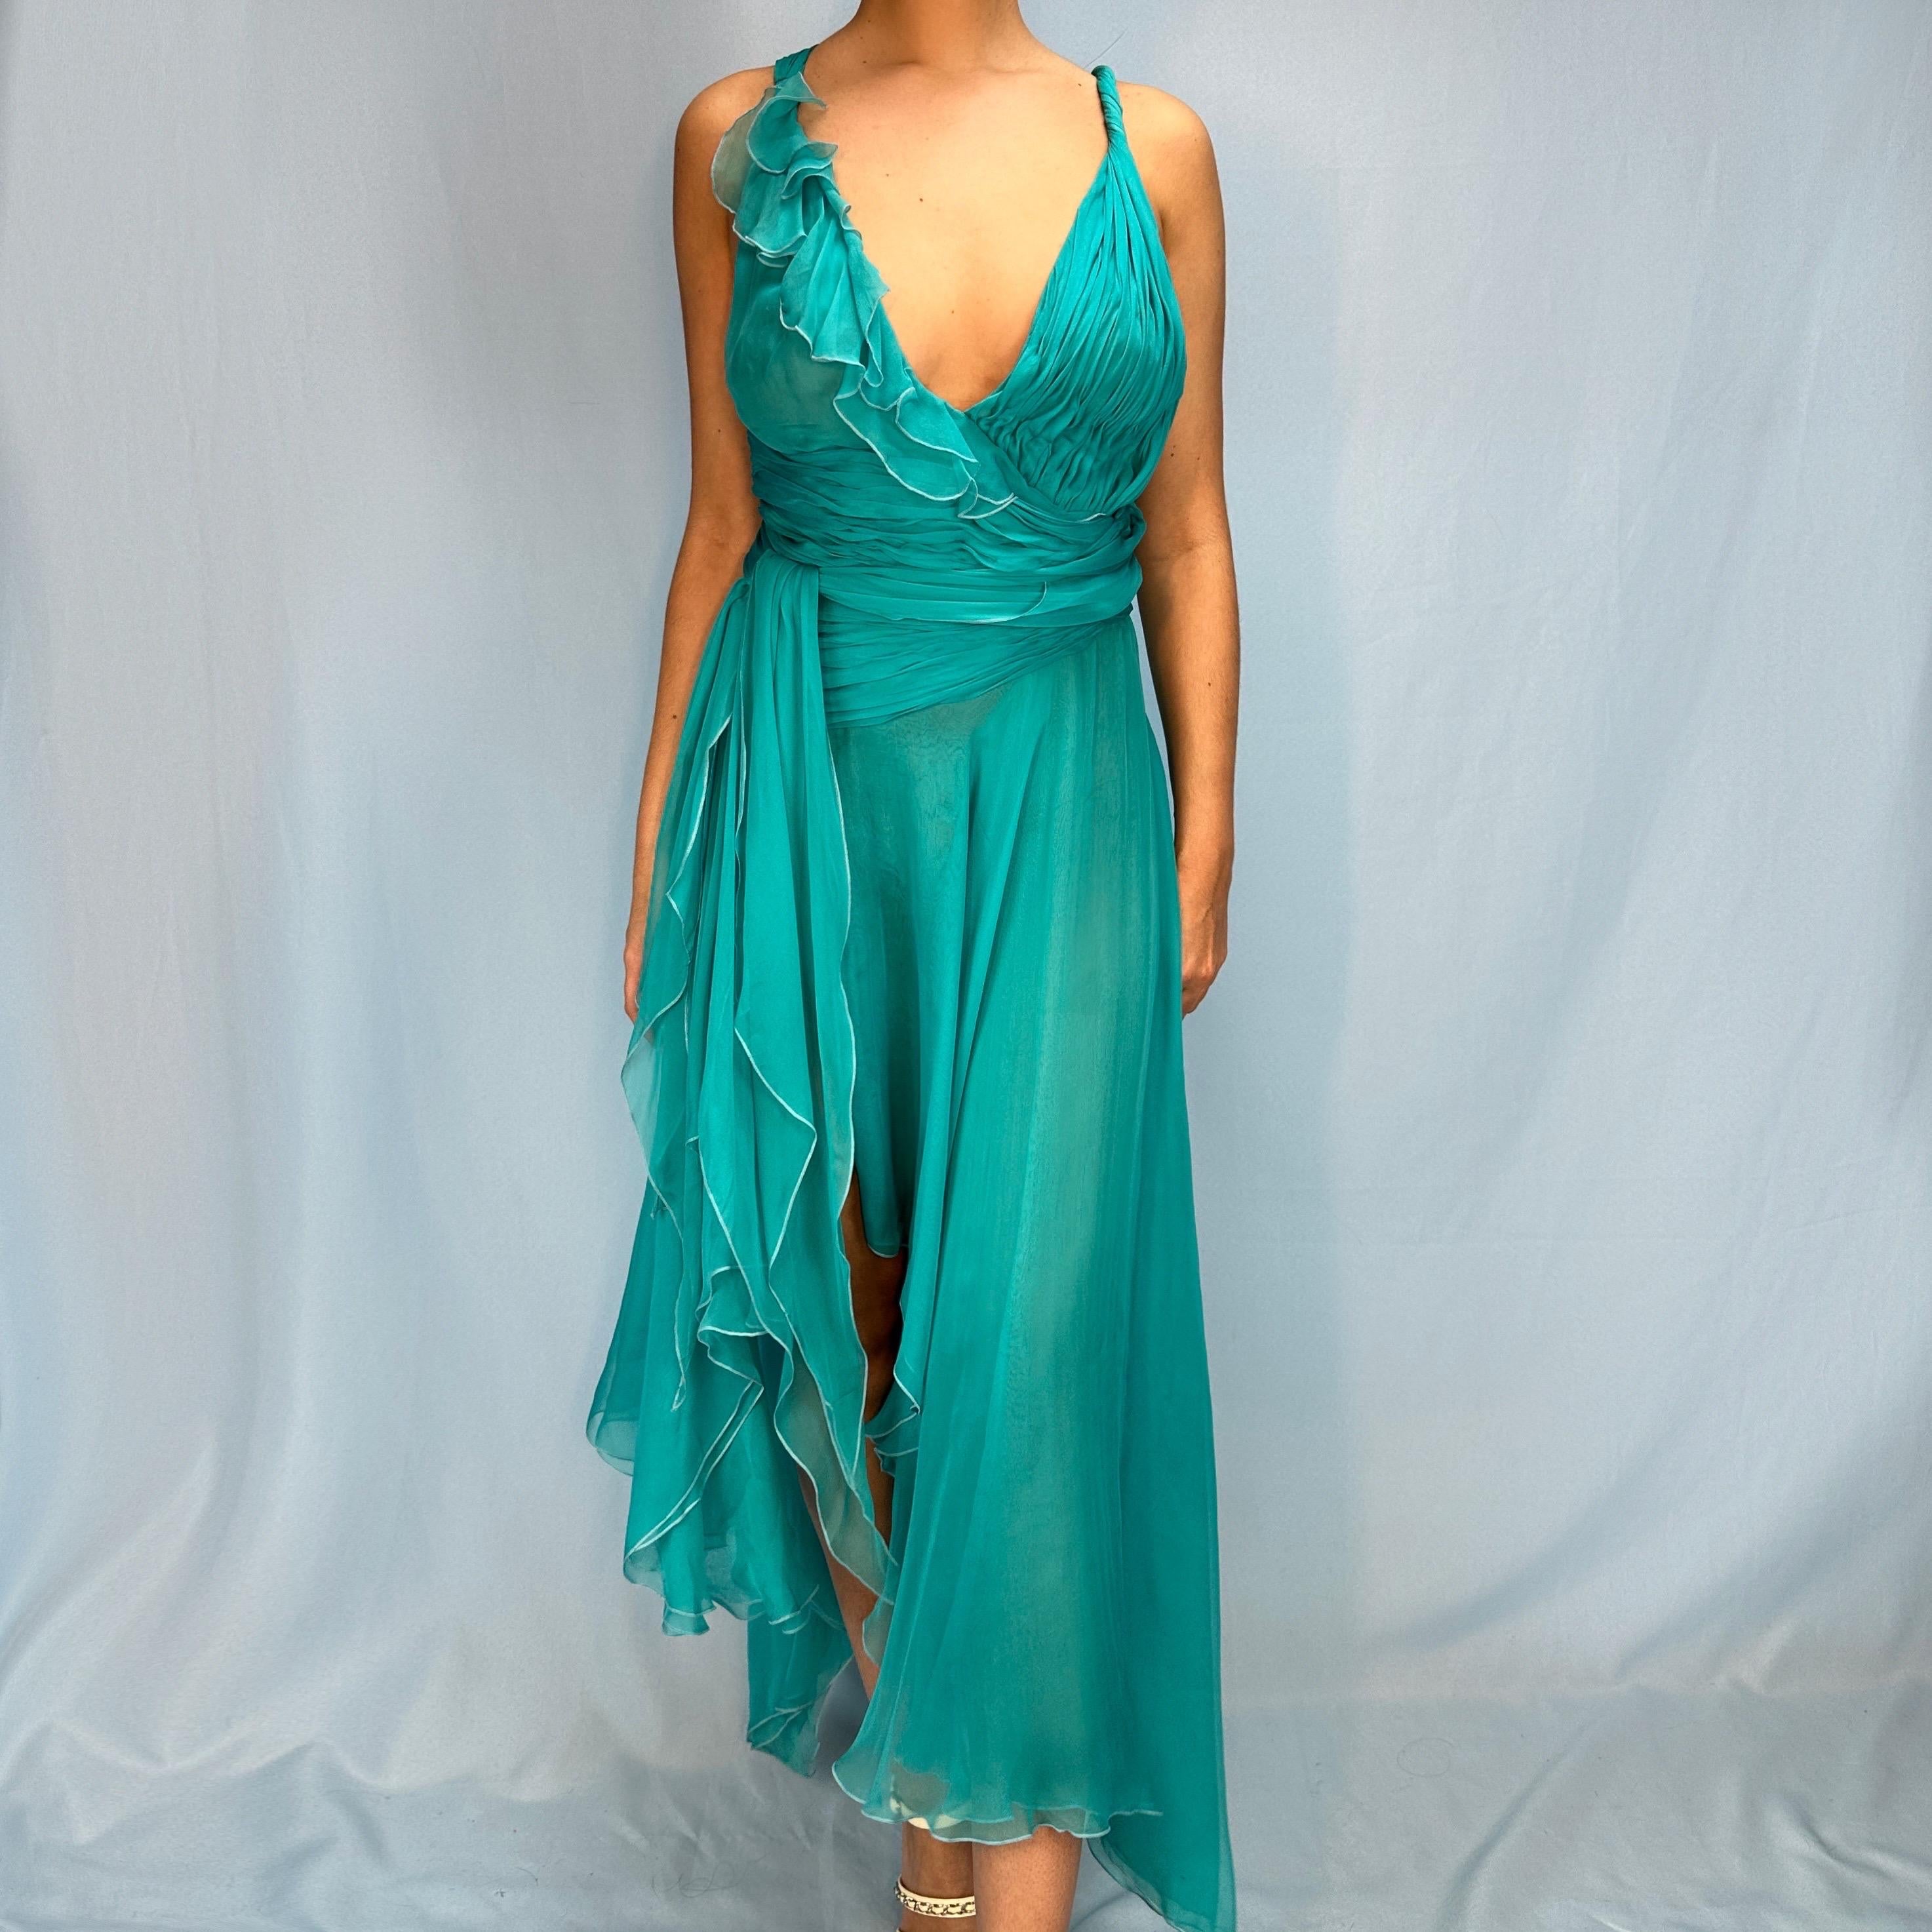 Versace Spring 2004 Teal Silk Chiffon Dress In Good Condition For Sale In Hertfordshire, GB